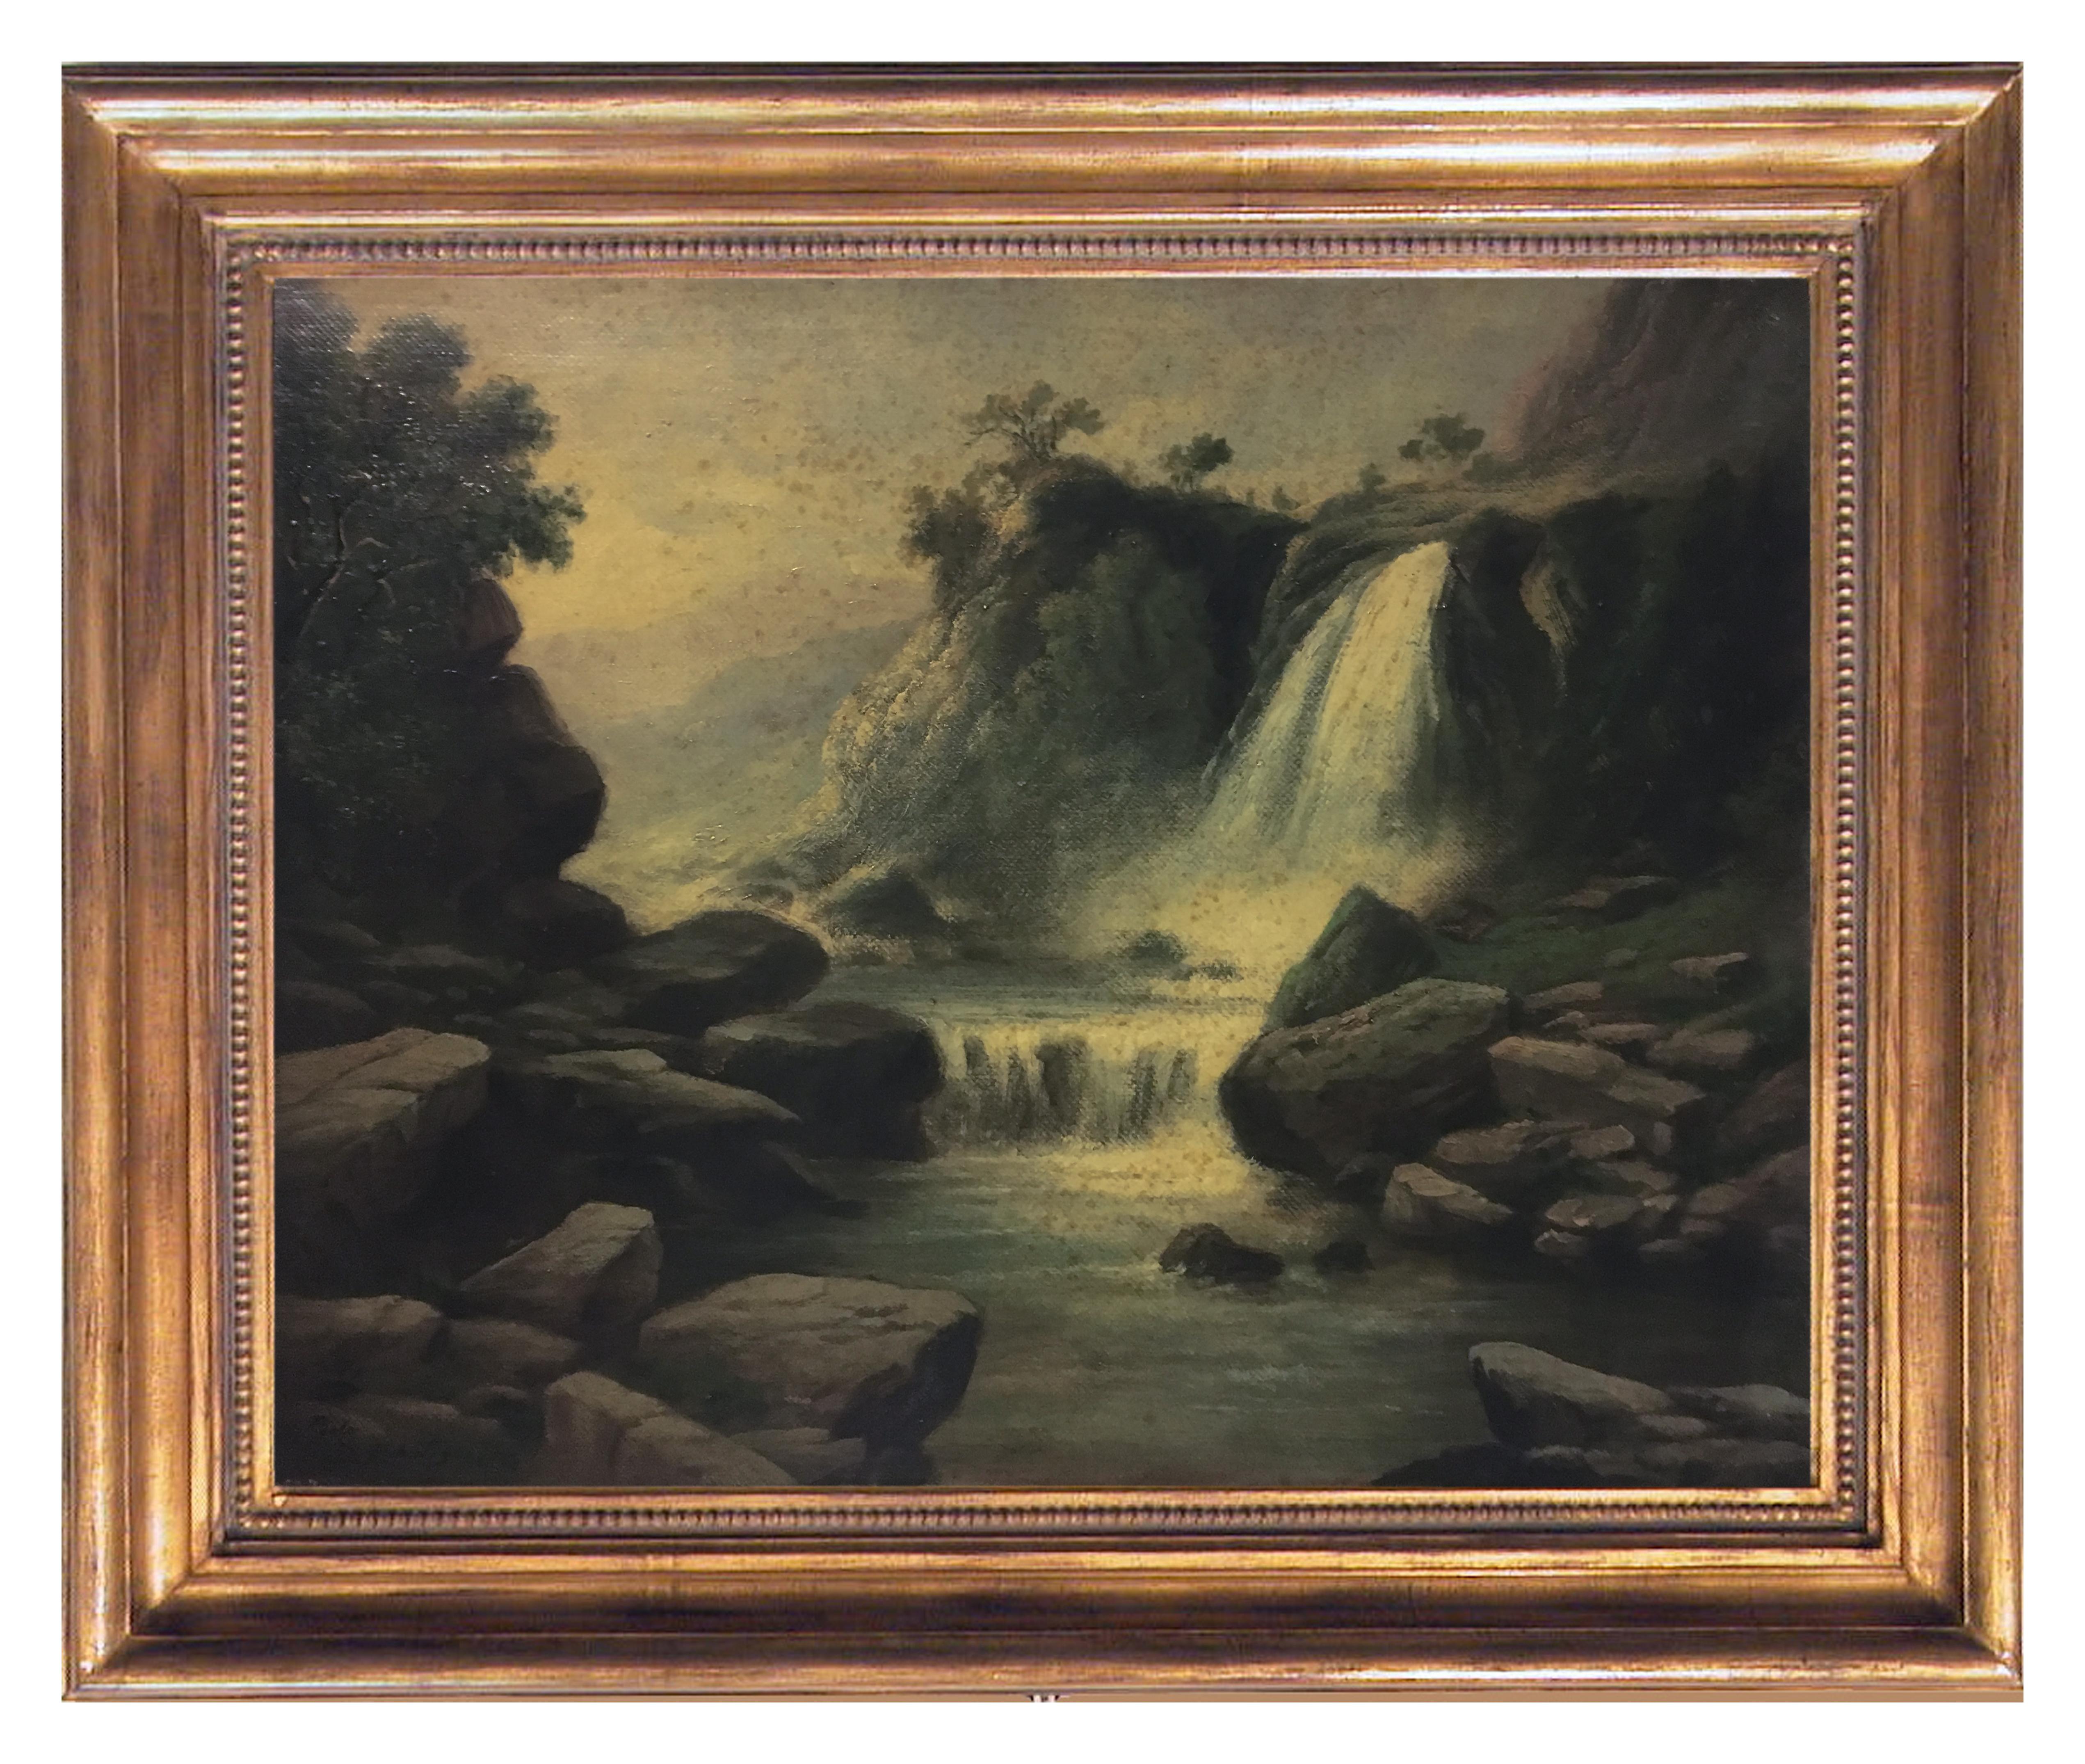 THE WATERFALL - American School -Italian Landscape Oil on Canvas Painting